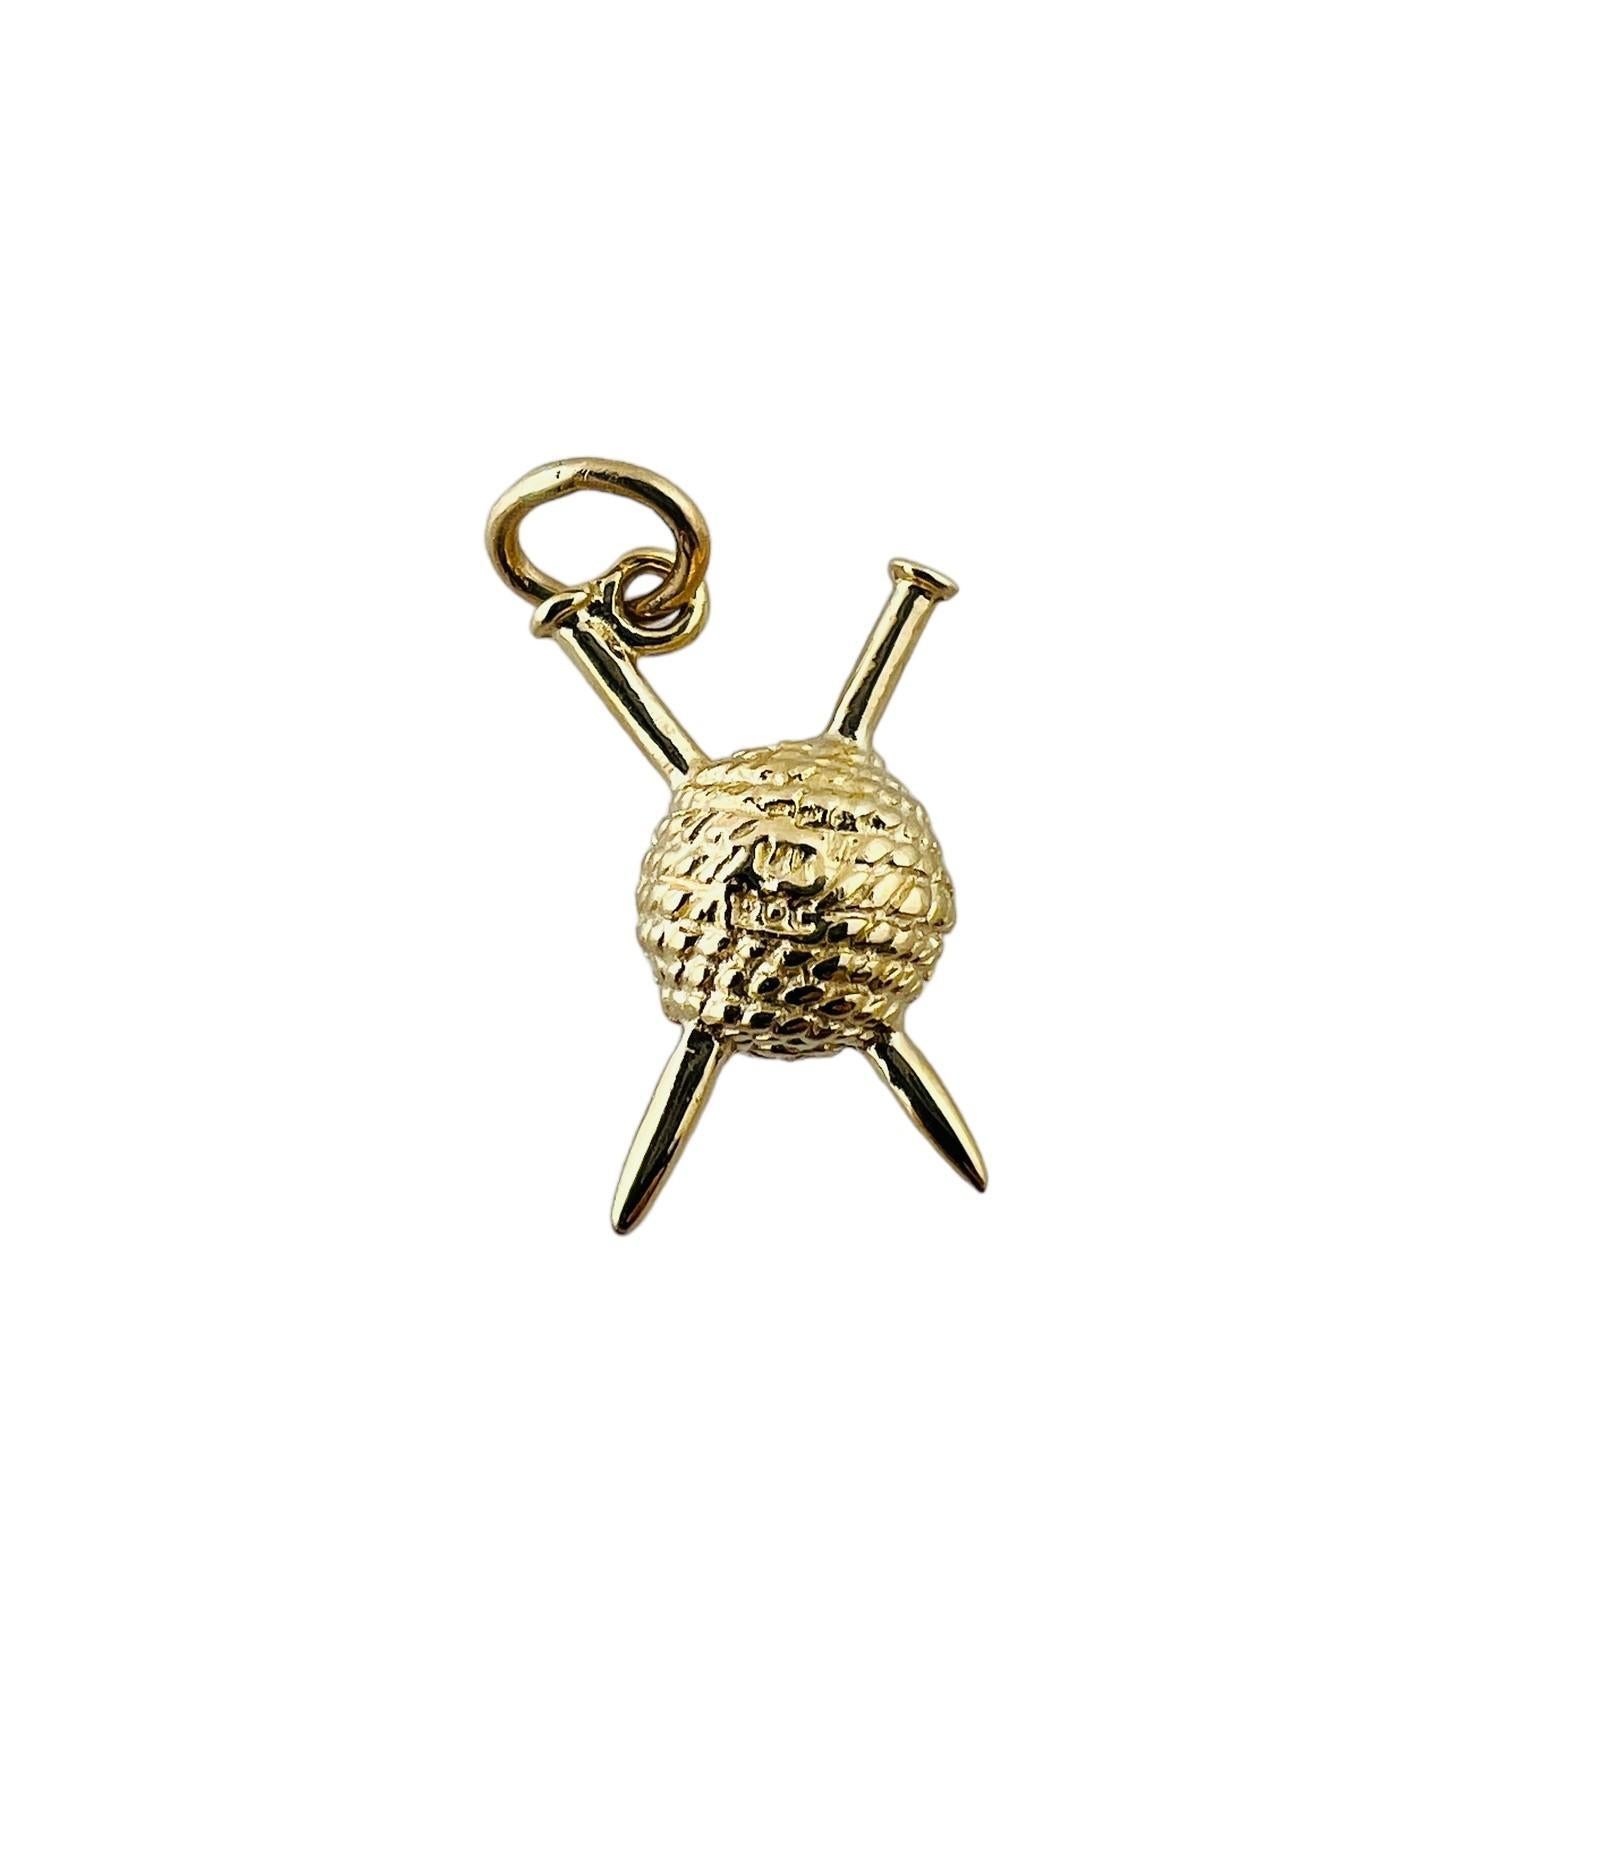 10K Yellow Gold Knitting Yarn and Needles Charm Pendant

This cute knitting charm  is set in 10K yellow gold

Pendant is approx. 17.9 x 11.2 x 9.0 mm

3.6 g / 2.3 dwt

Acid Tested for 10K Stmaped RQC

*Does not come with chain